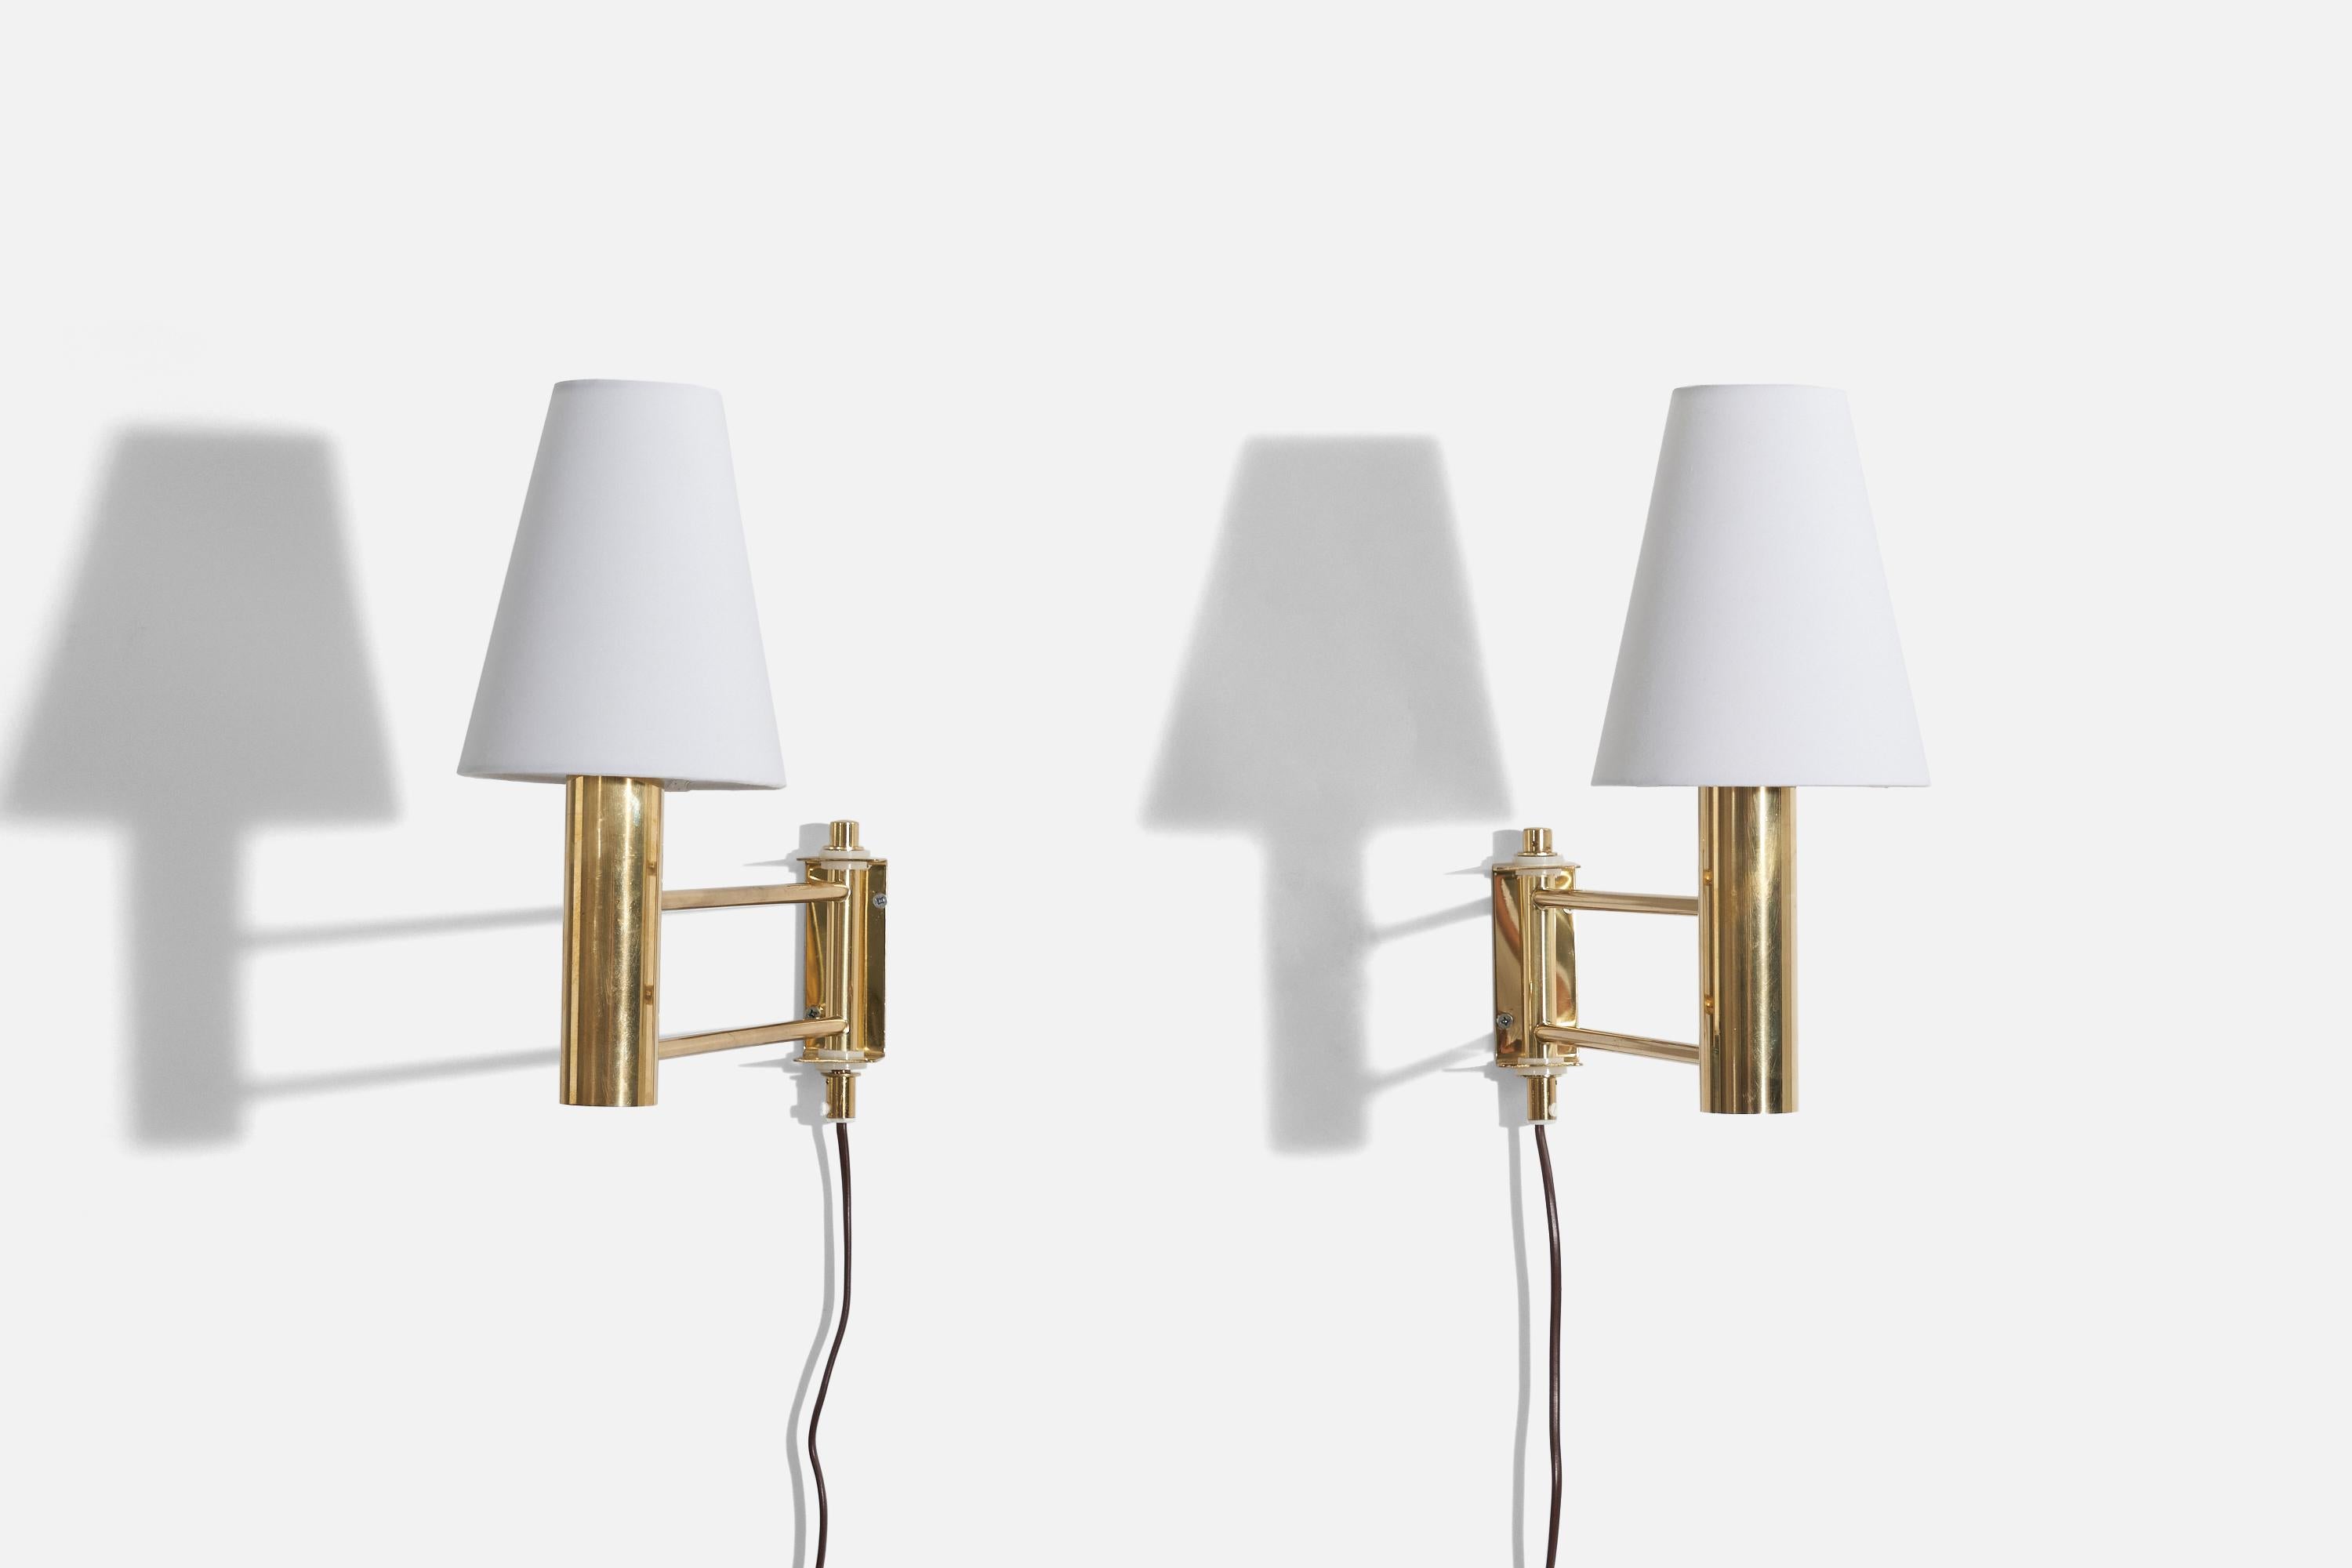 A pair of brass, adjustable wall lights designed and produced in Sweden, c. 1970s. 

Sold with lampshade.
Dimensions of Sconce (inches) : 8 x 1.625 x 13.625 (H x W x D)
Dimensions of Shade (inches) : 2.875 x 5.5 x 6.75 (T x B x H)
Dimensions of